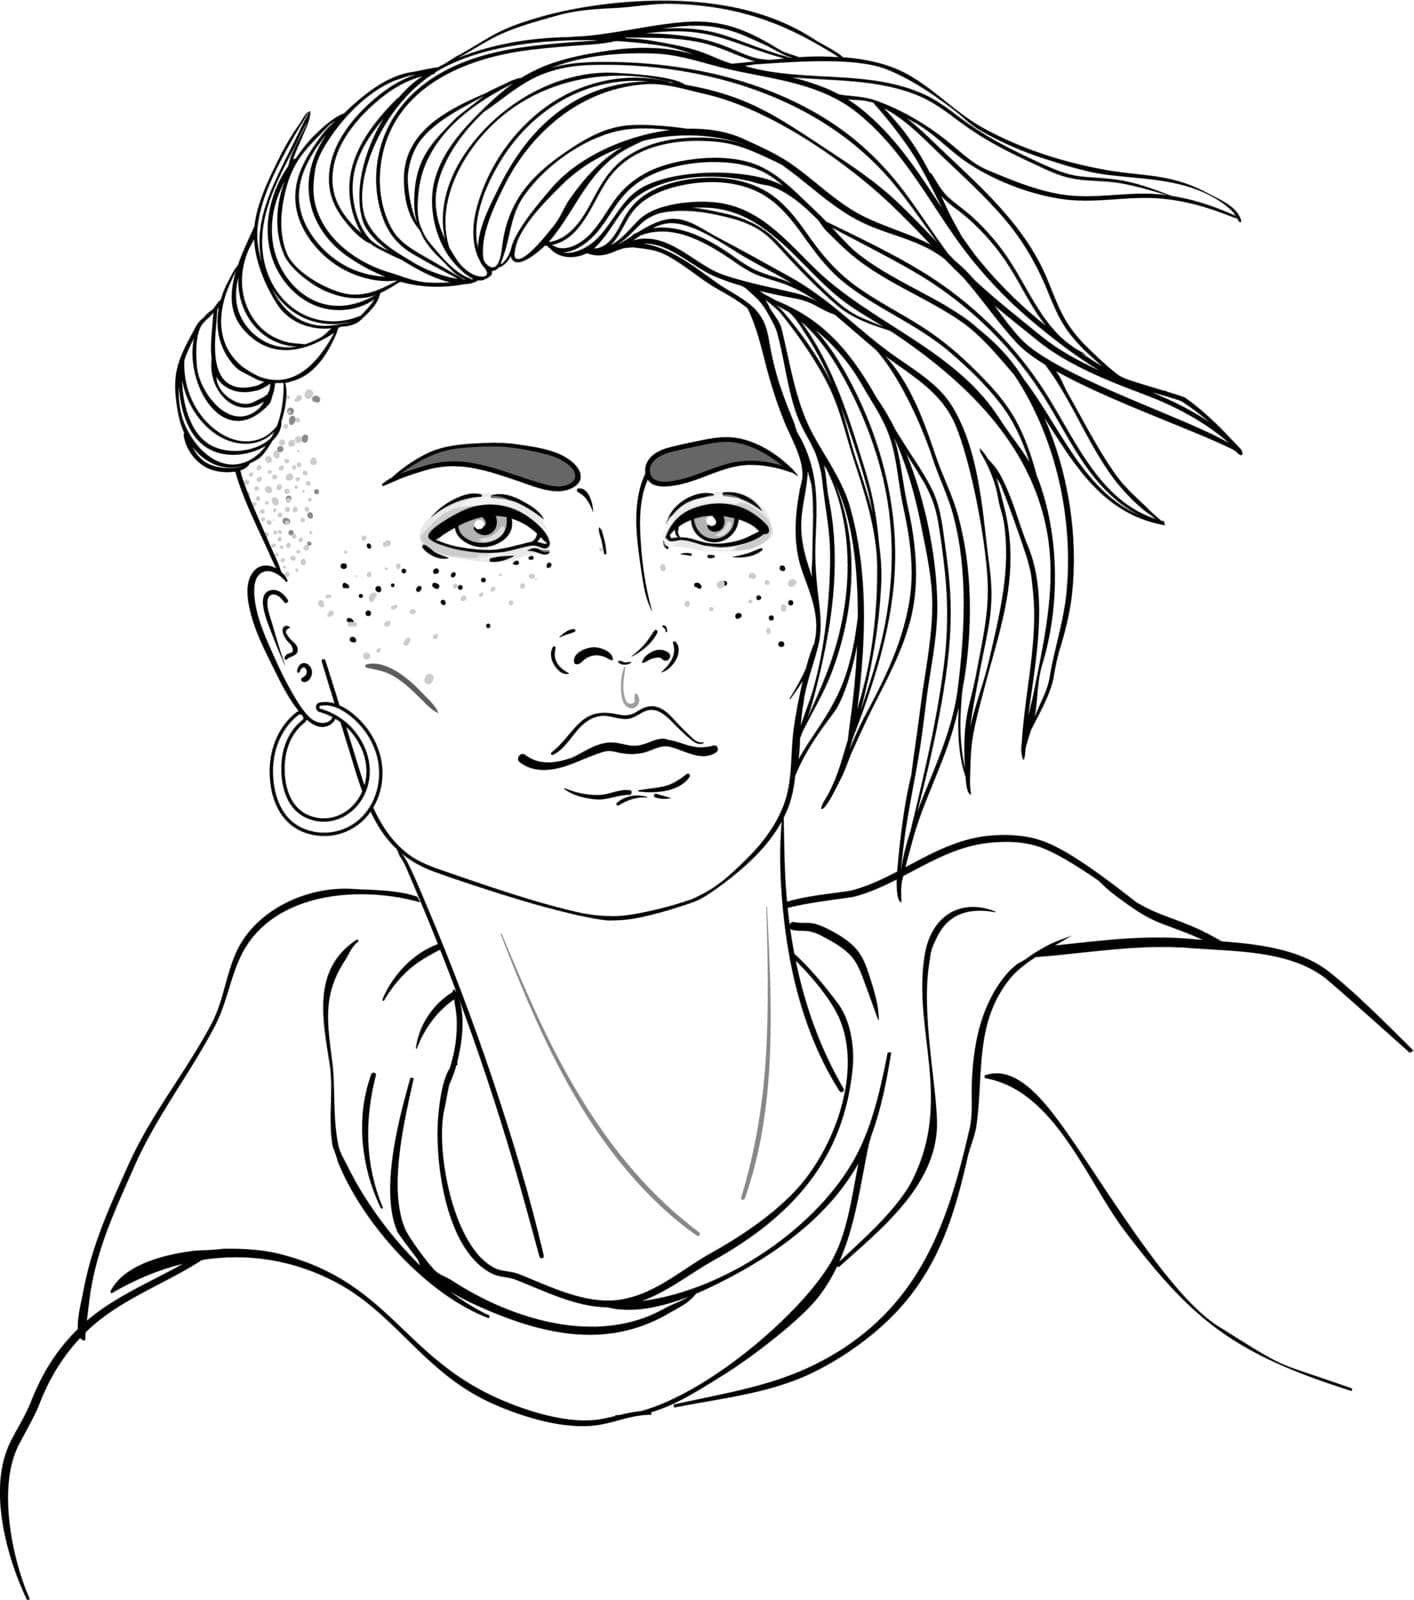 Portrait of a young pretty caucasian woman with short pixie cut. Vector illustration isolated. Hand drawn art of a boyish looking girl. Modern street subculture haircut for woman.